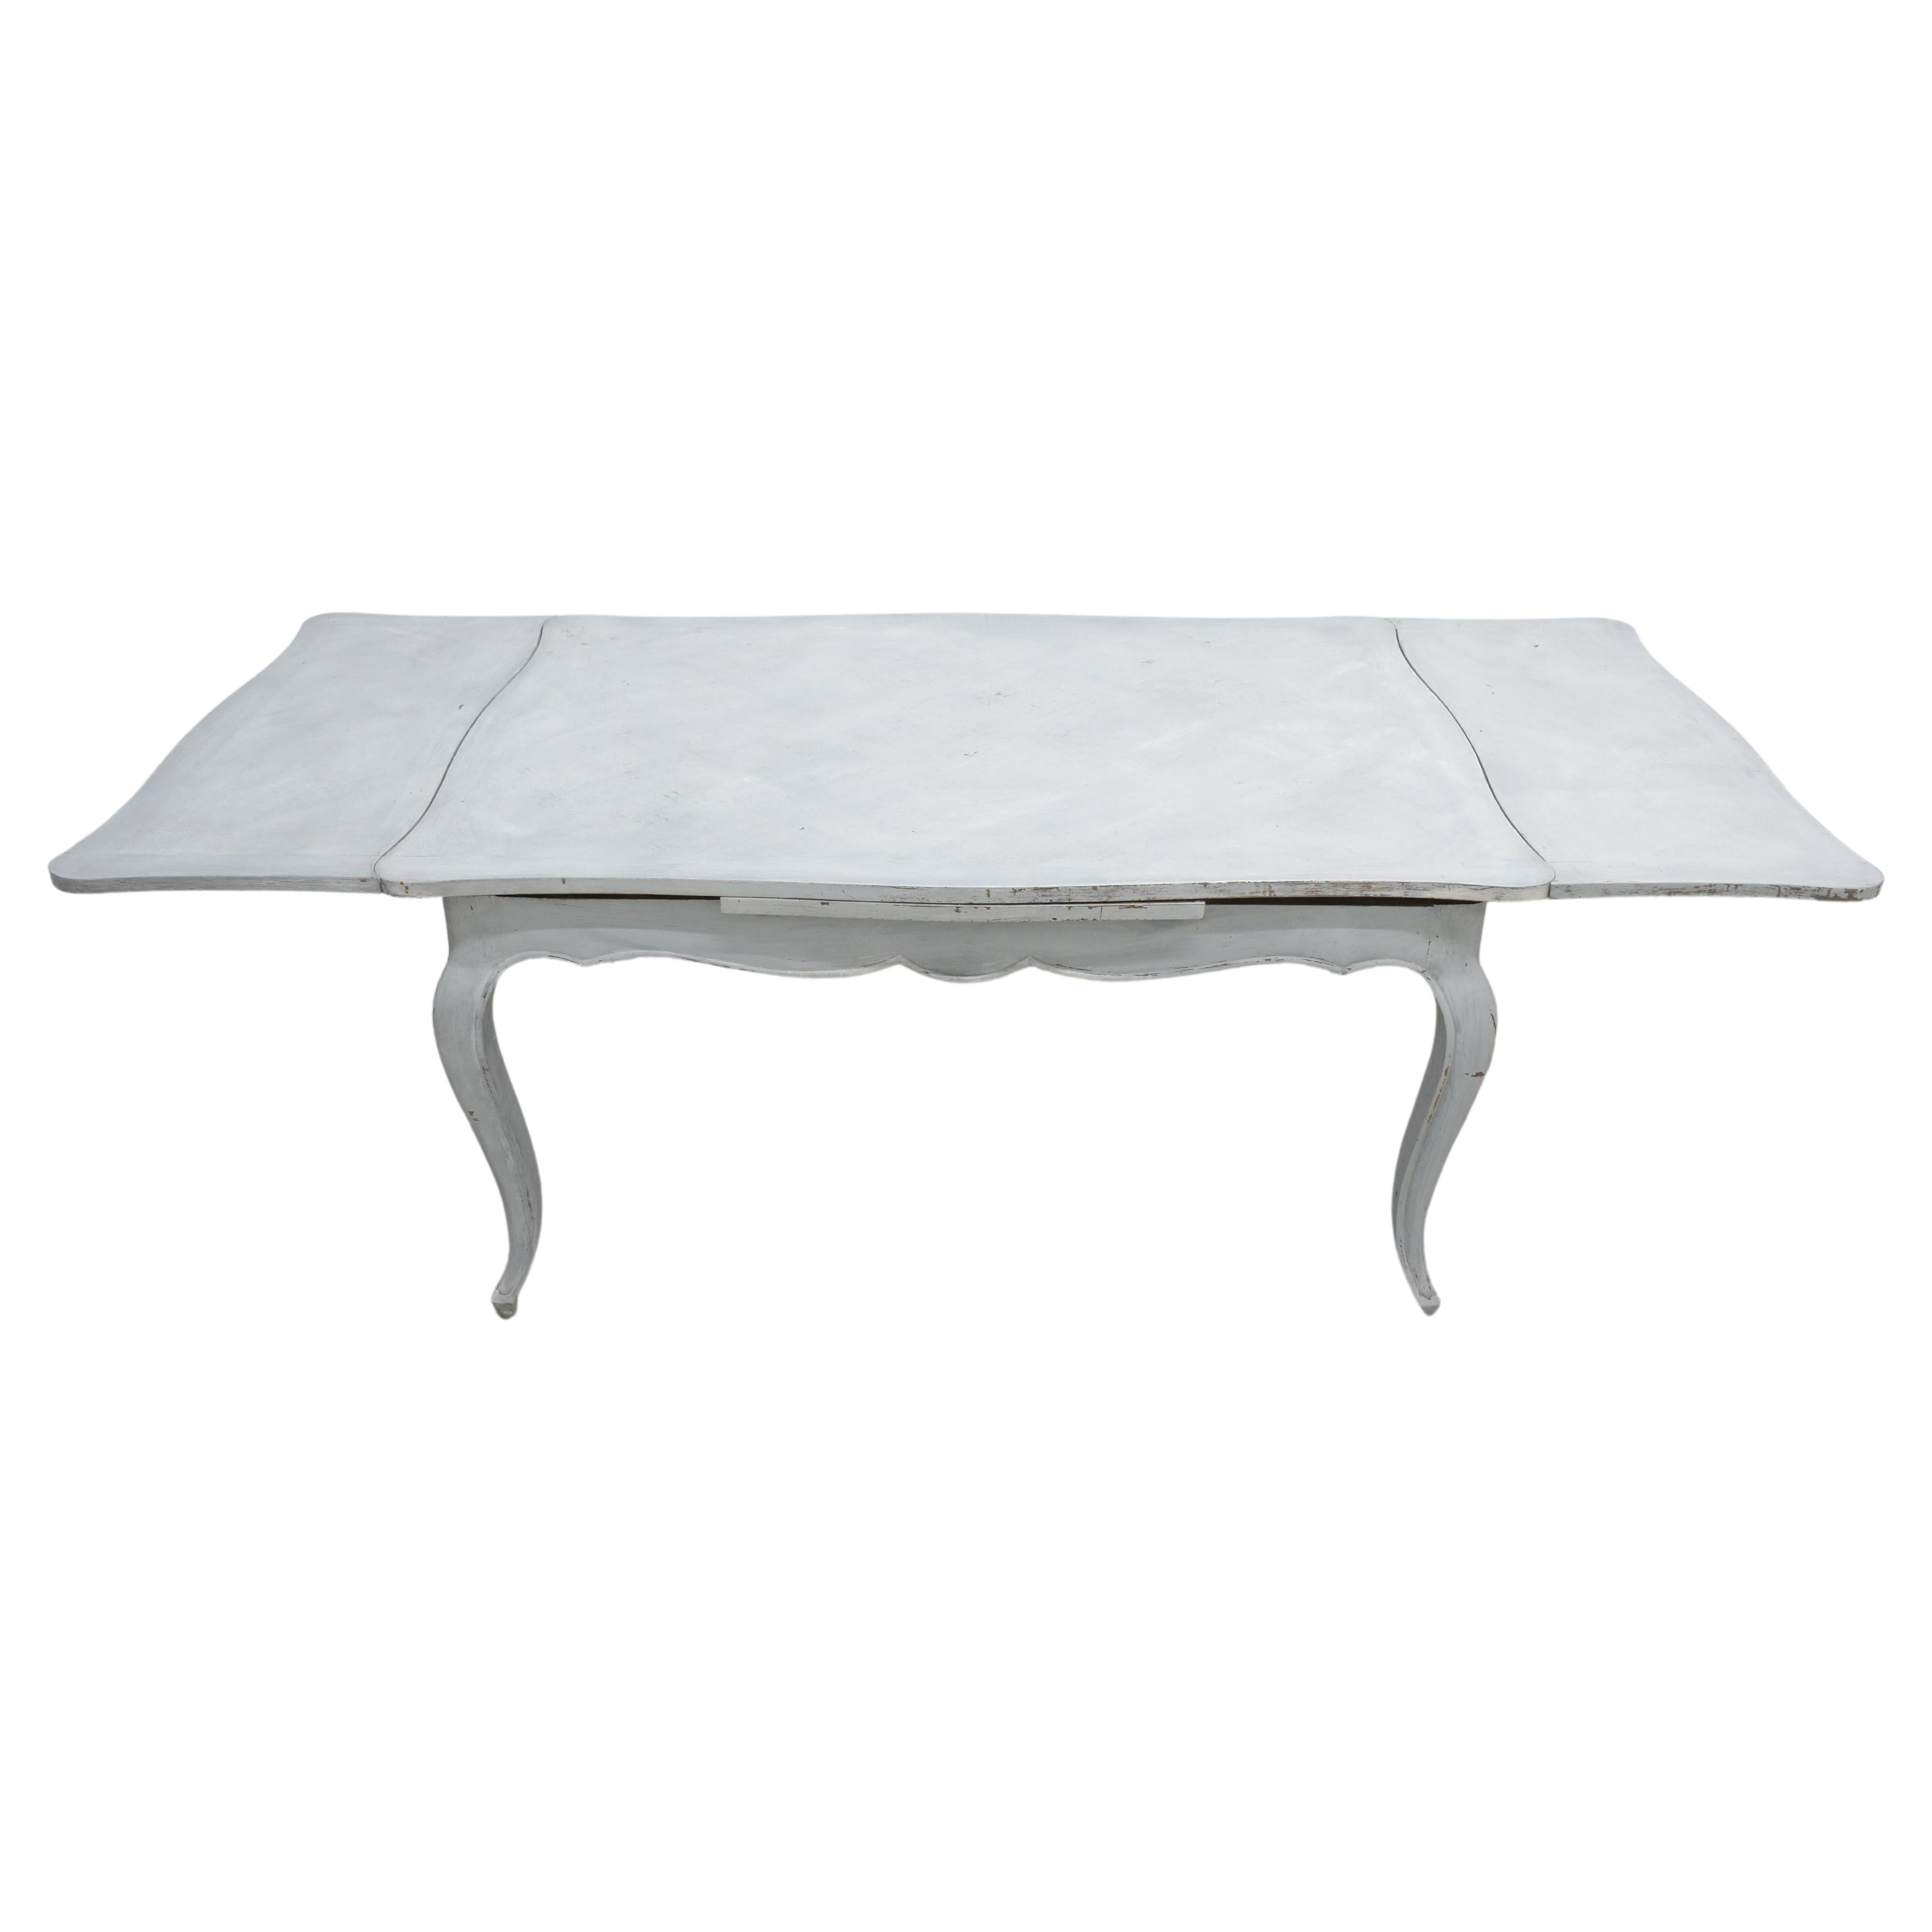 Early 1900s French Provincial Pale Grey Dining Table For Sale